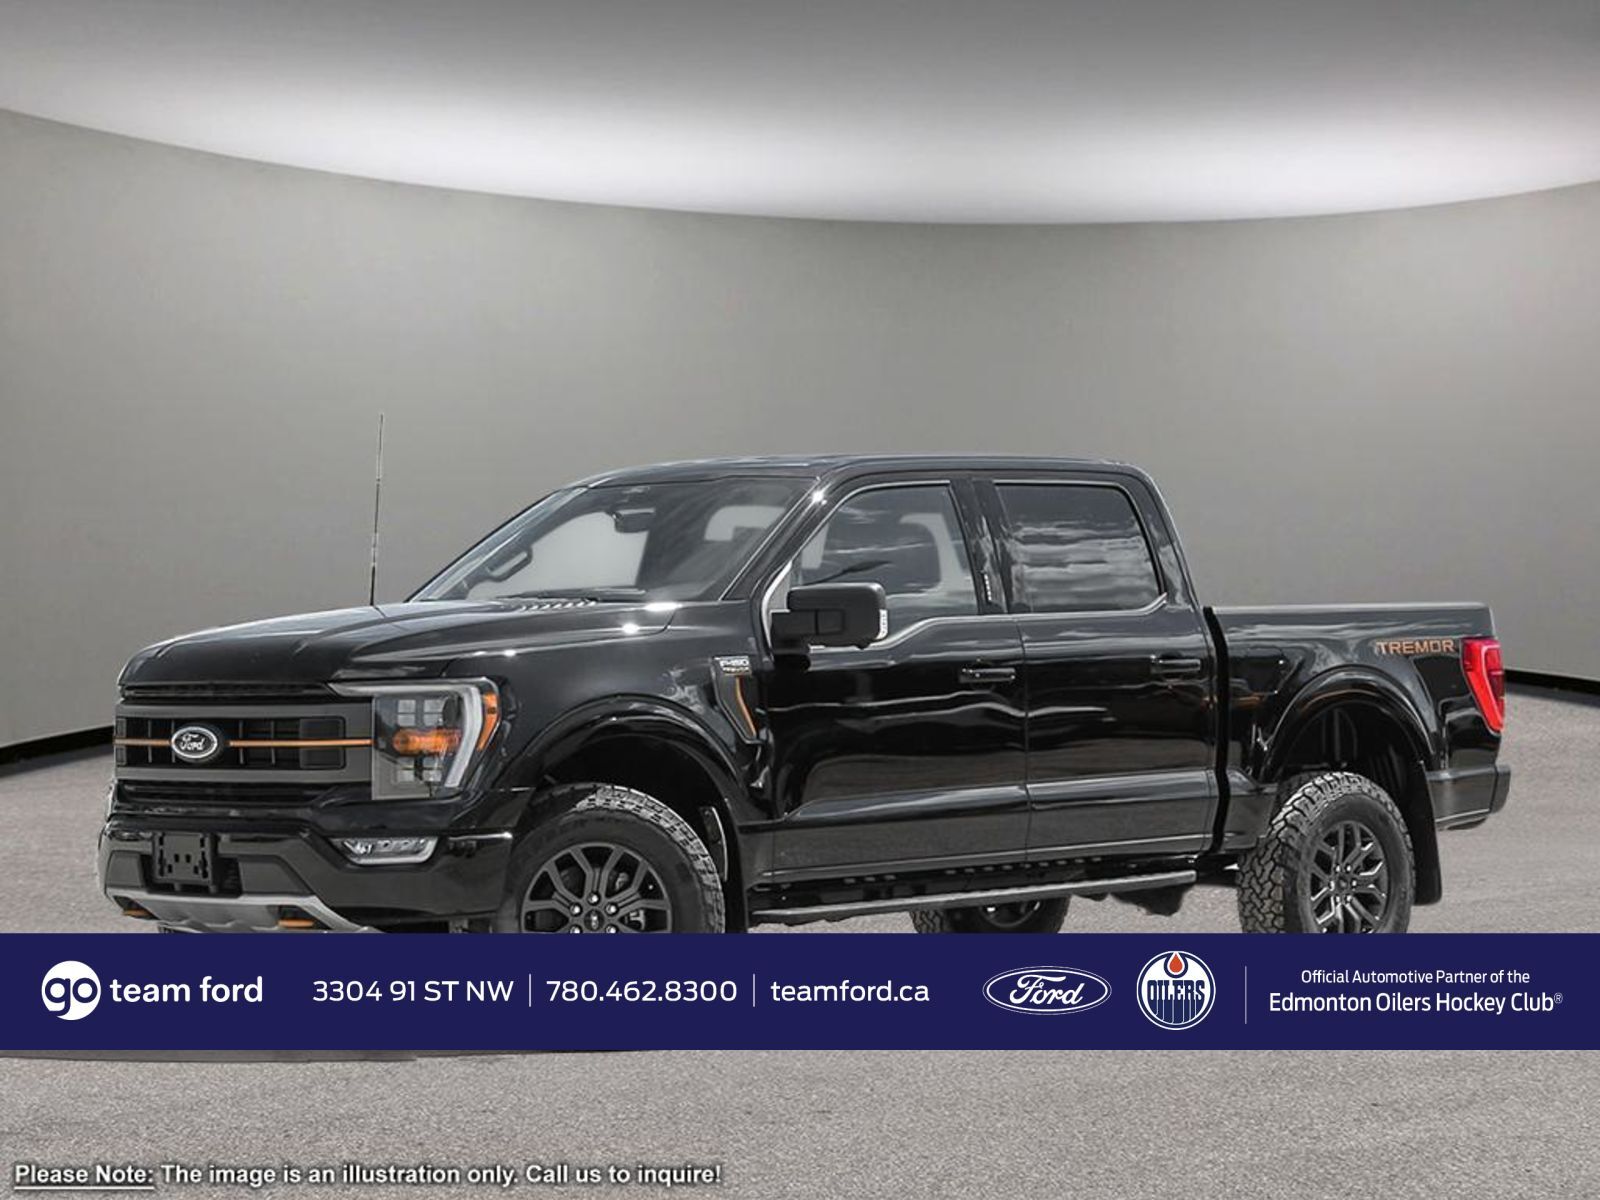 2023 Ford F-150 3.5L, ECOBOOST ENG, TREMOR, 360 DEGREE CAM, FORDPA